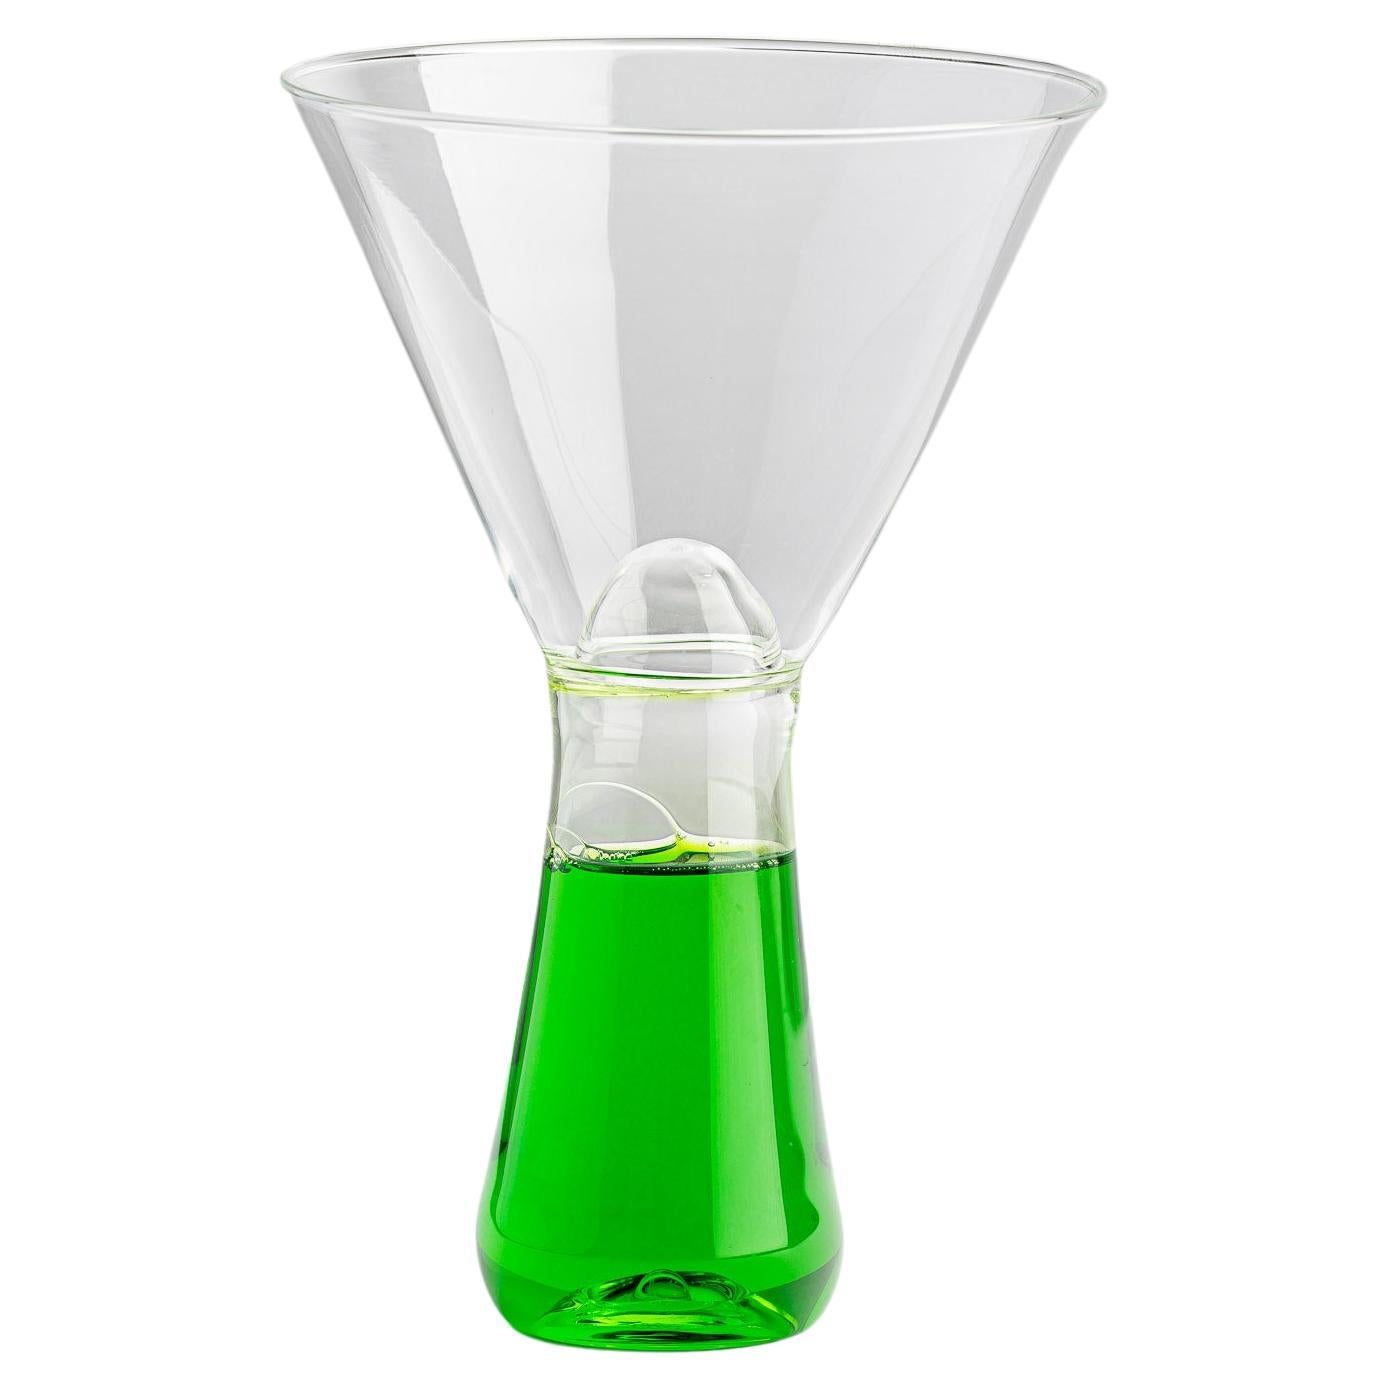 Green Murano Glass Martini Cup, VELENI by L+W, 2022 - Limited Edition